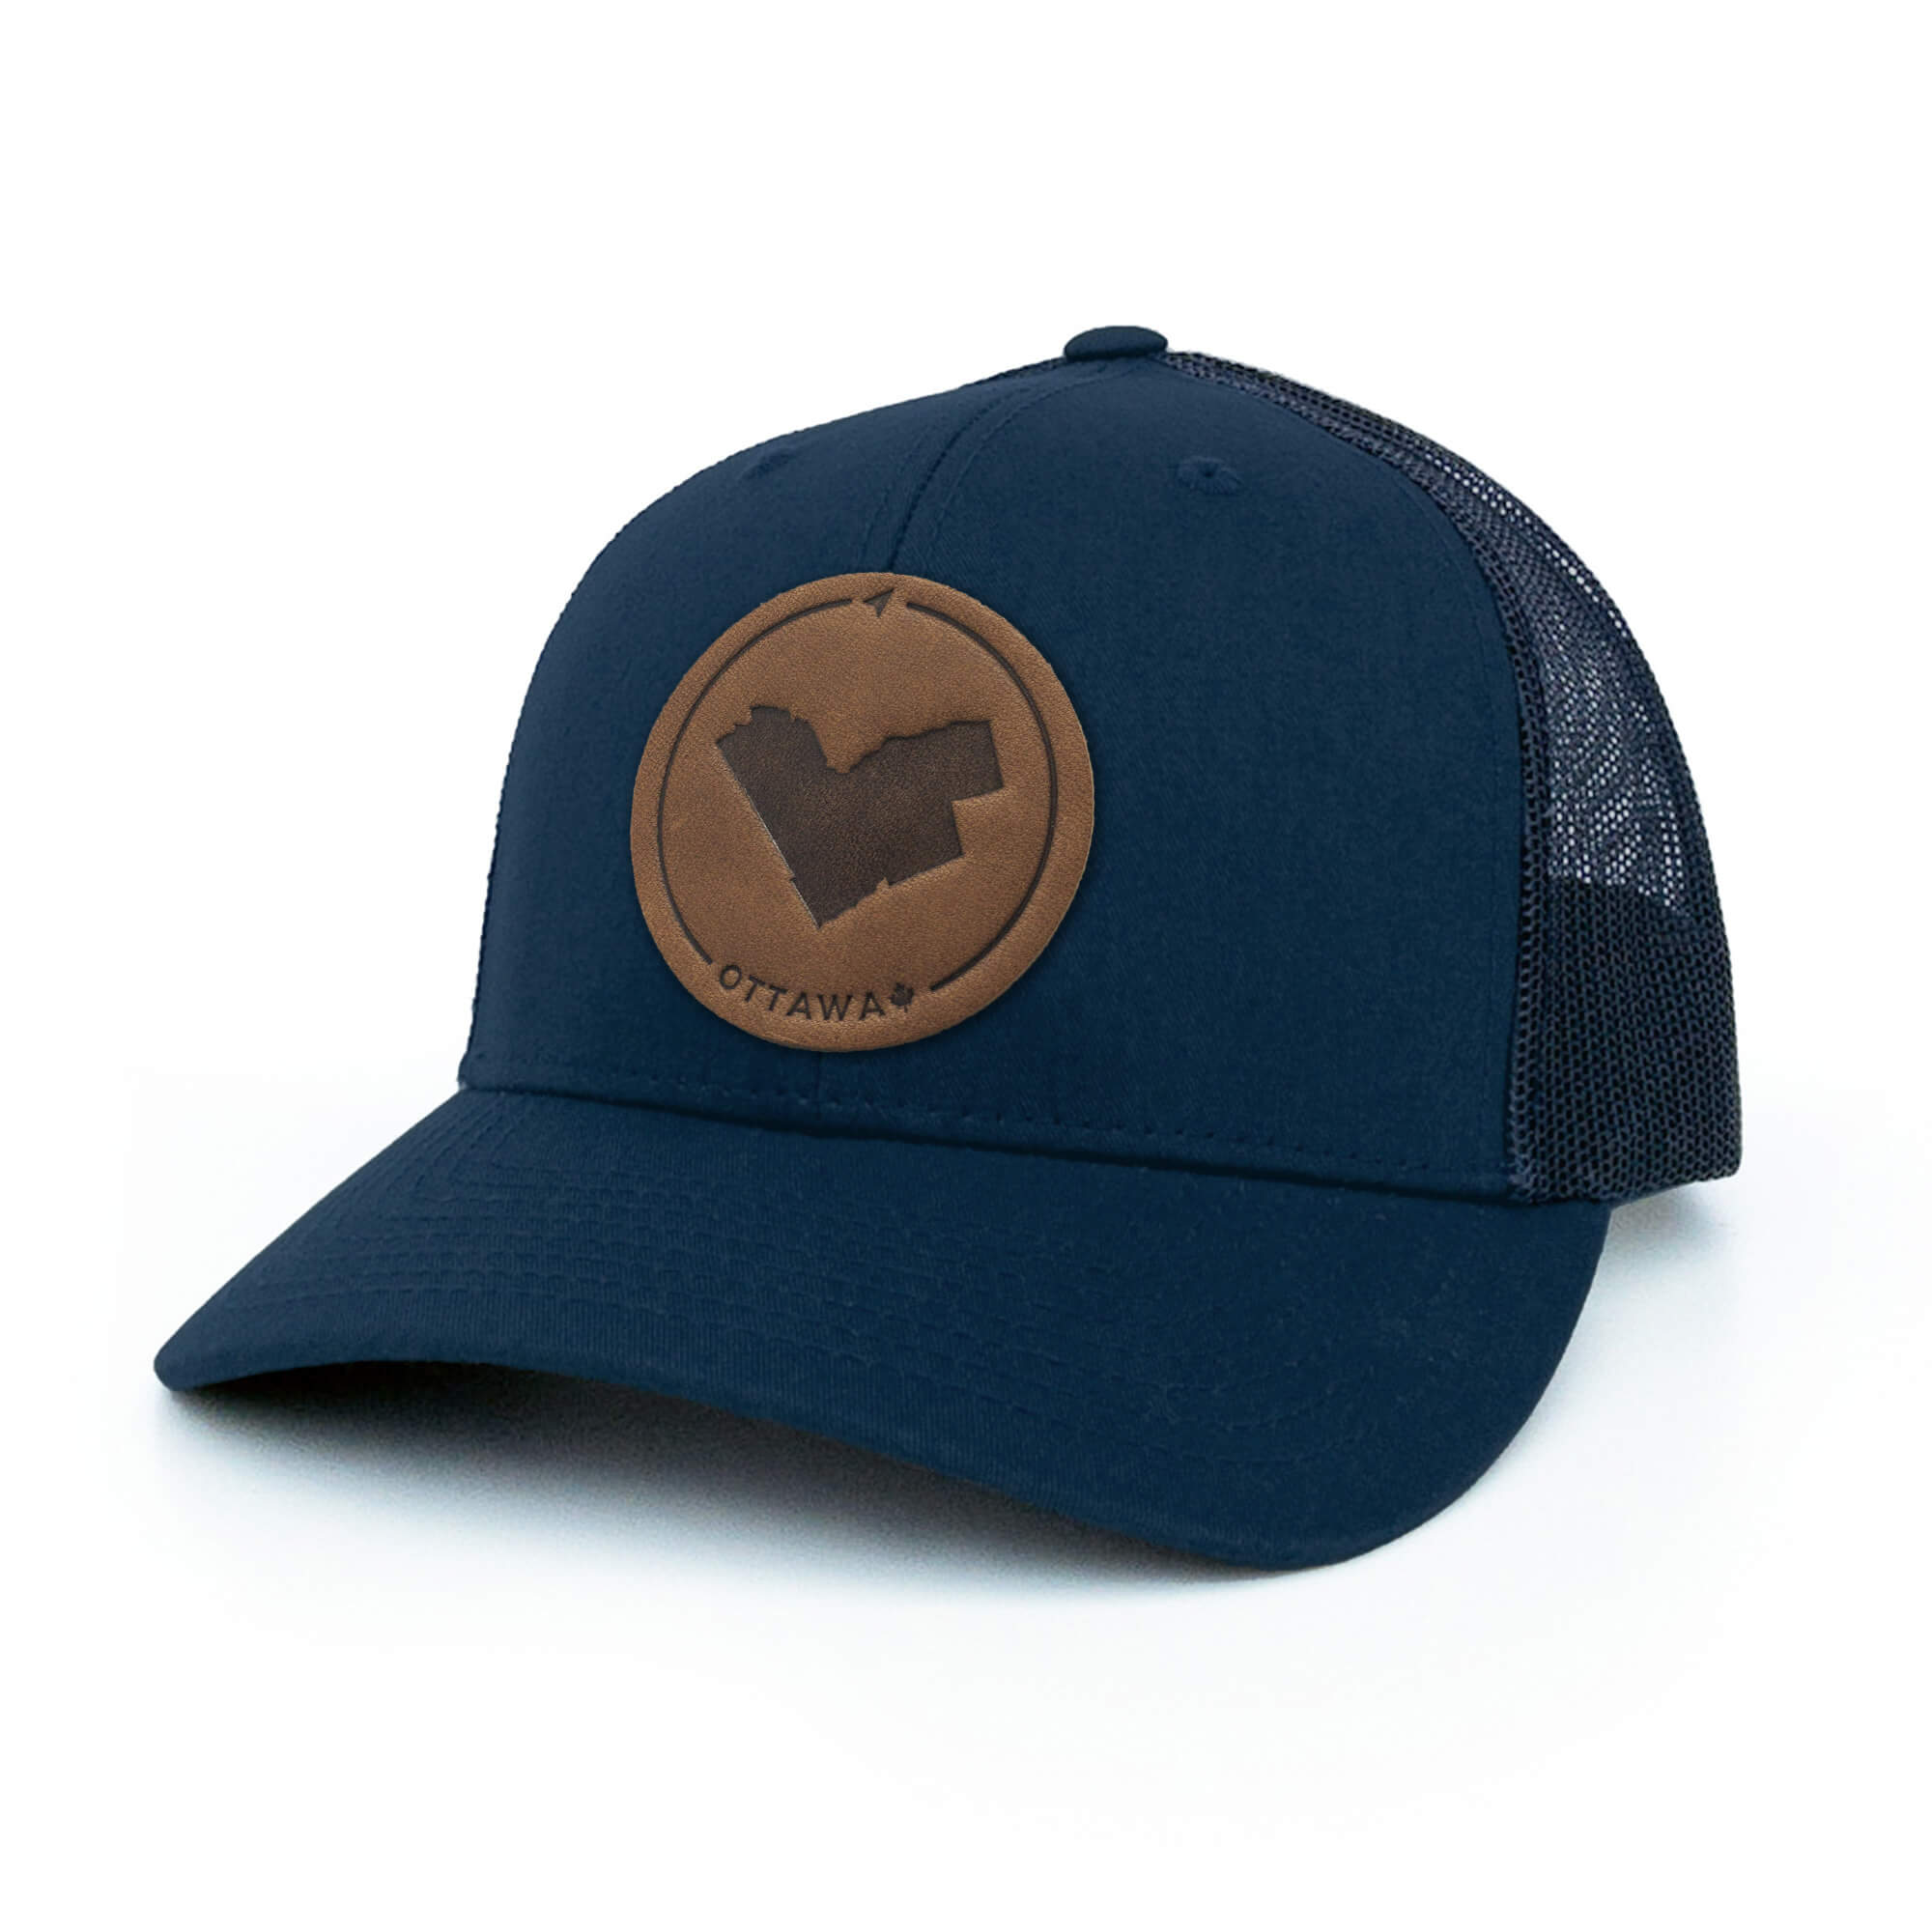 Navy trucker hat with full-grain leather patch of Ottawa | BLACK-002-007, CHARC-002-007, NAVY-002-007, HGREY-002-007, MOSS-002-007, BROWN-002-007